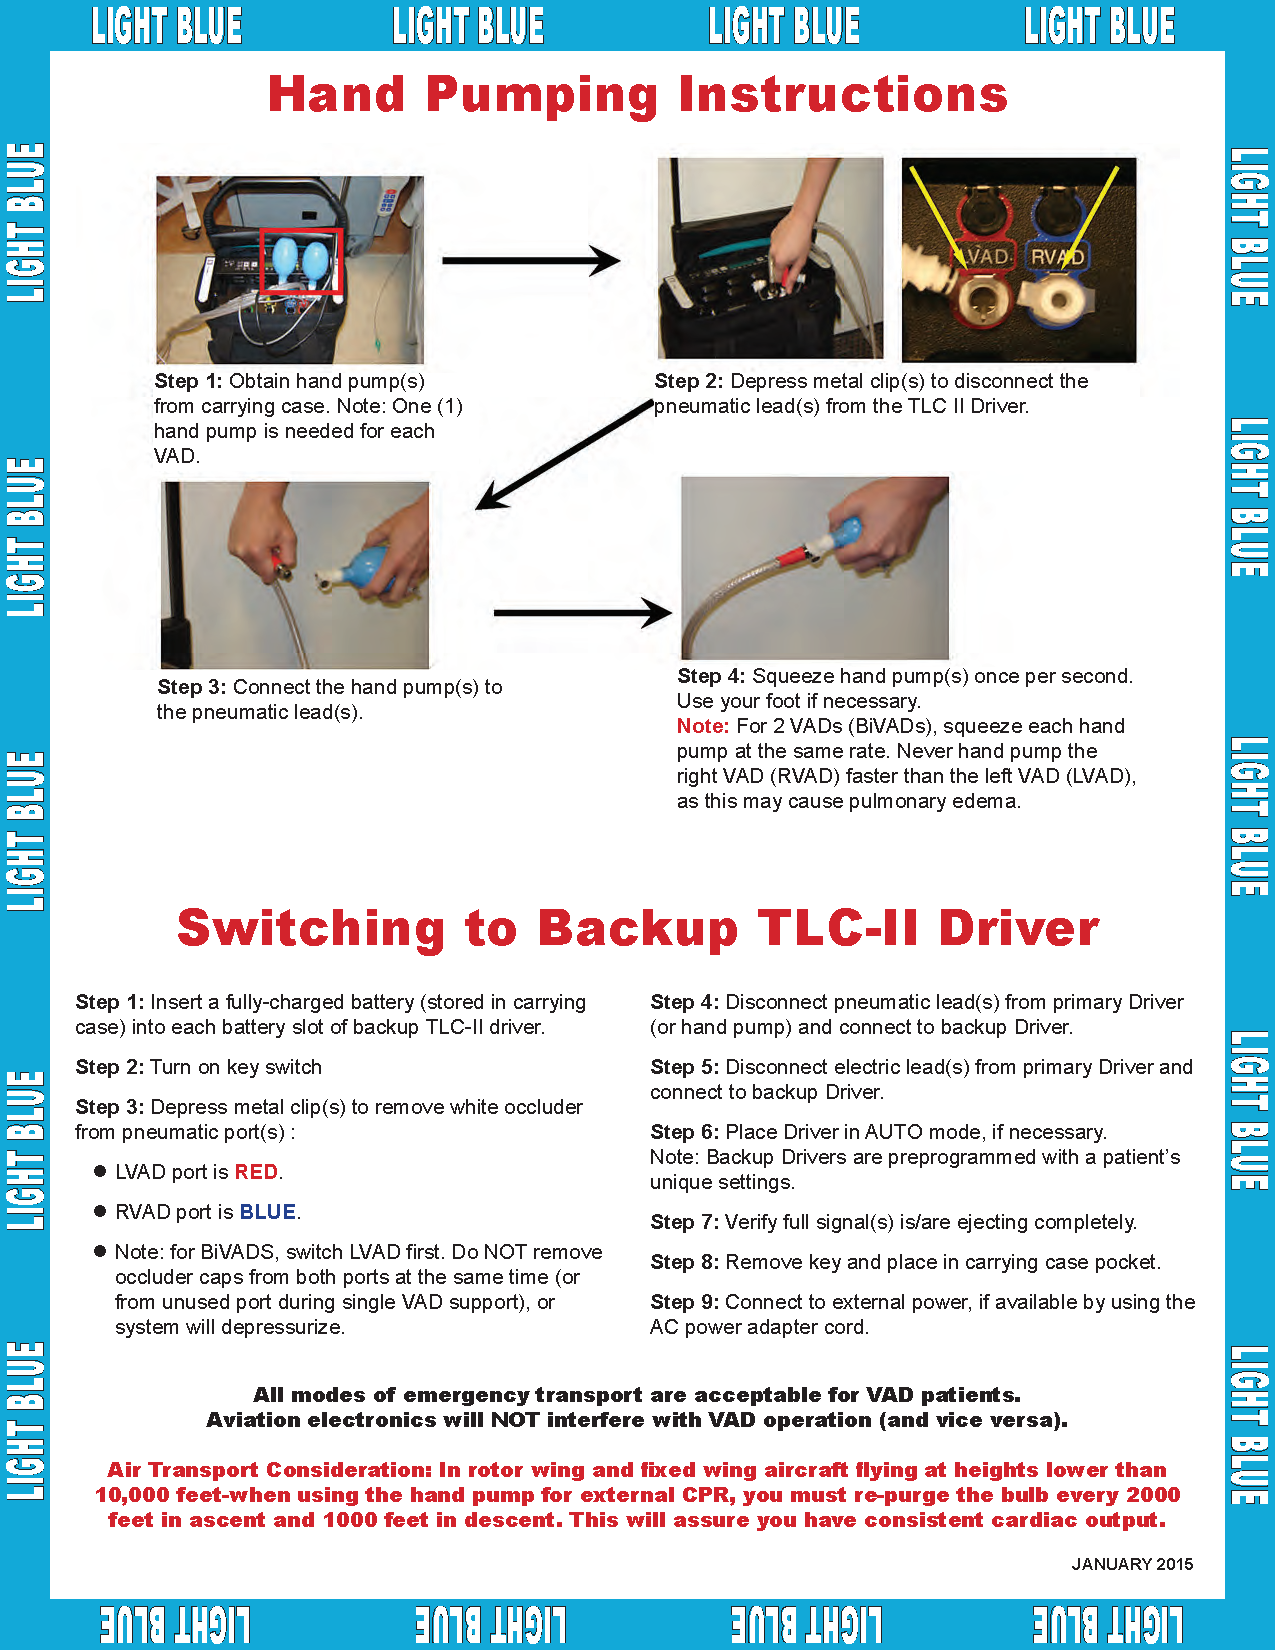 Thoratec PVAD-IVAD EMS Guide 2015_Page_7.png